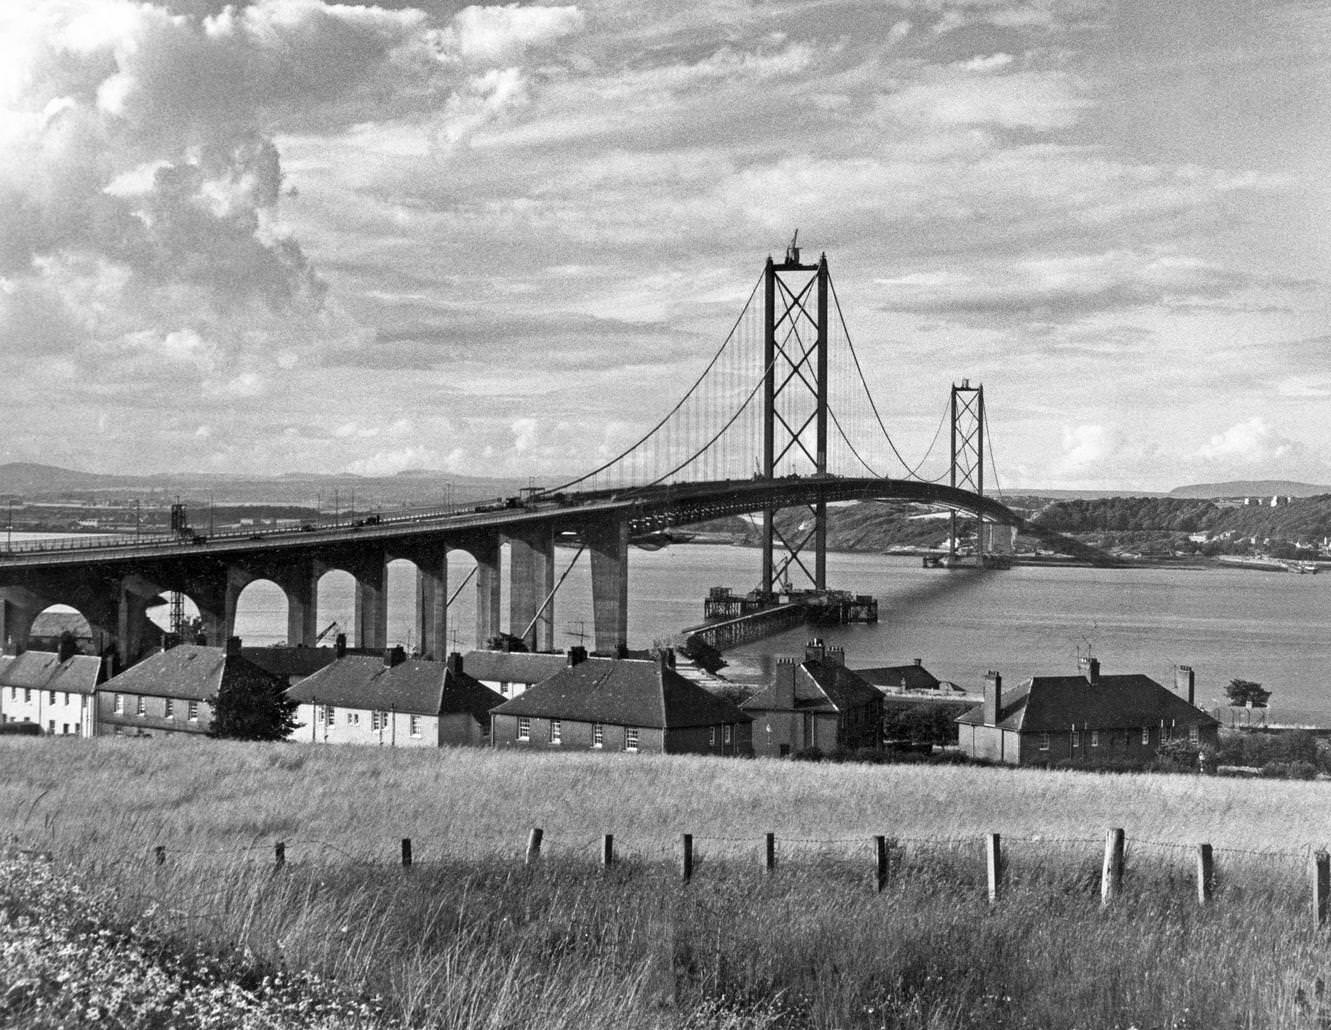 The Forth Road bridge from South Queensferry to North Queensferry, shortly after construction, August 1964.